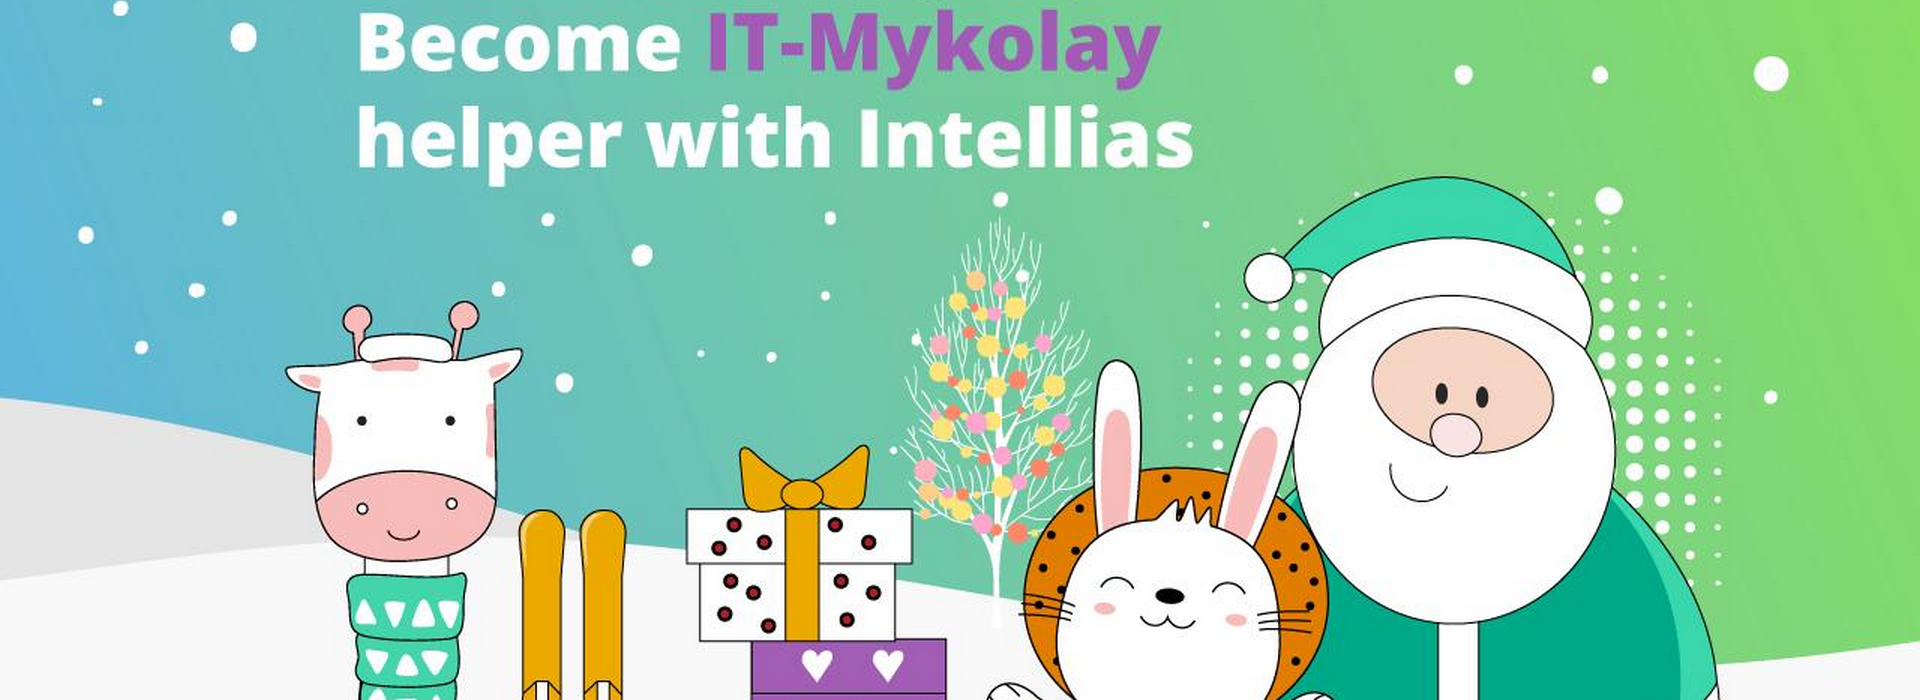 Intellias Launches a “Good Winter” Charity Campaign